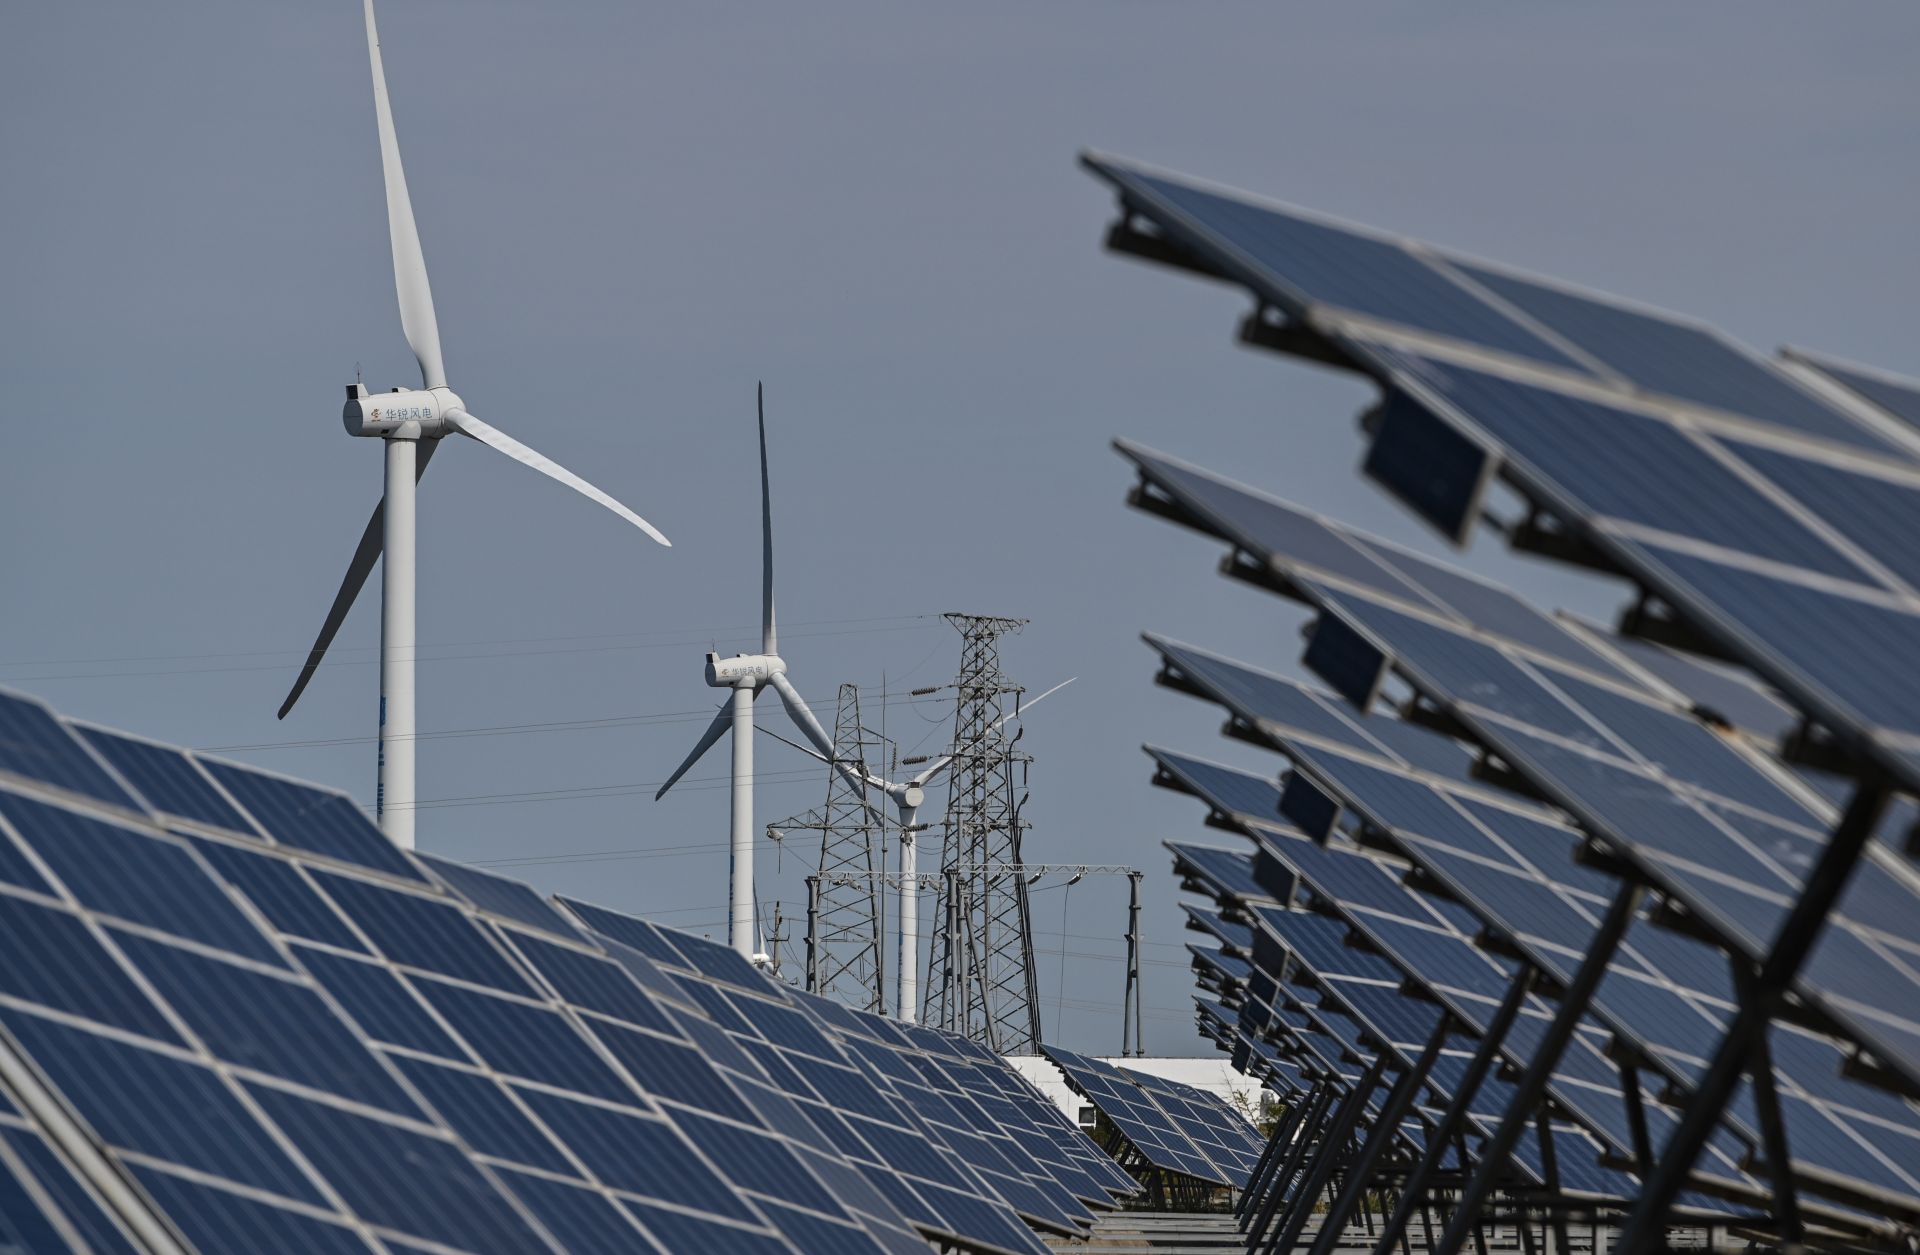 Solar panels and wind turbines work in an integrated power station in Yancheng, China, on Oct. 14, 2020.